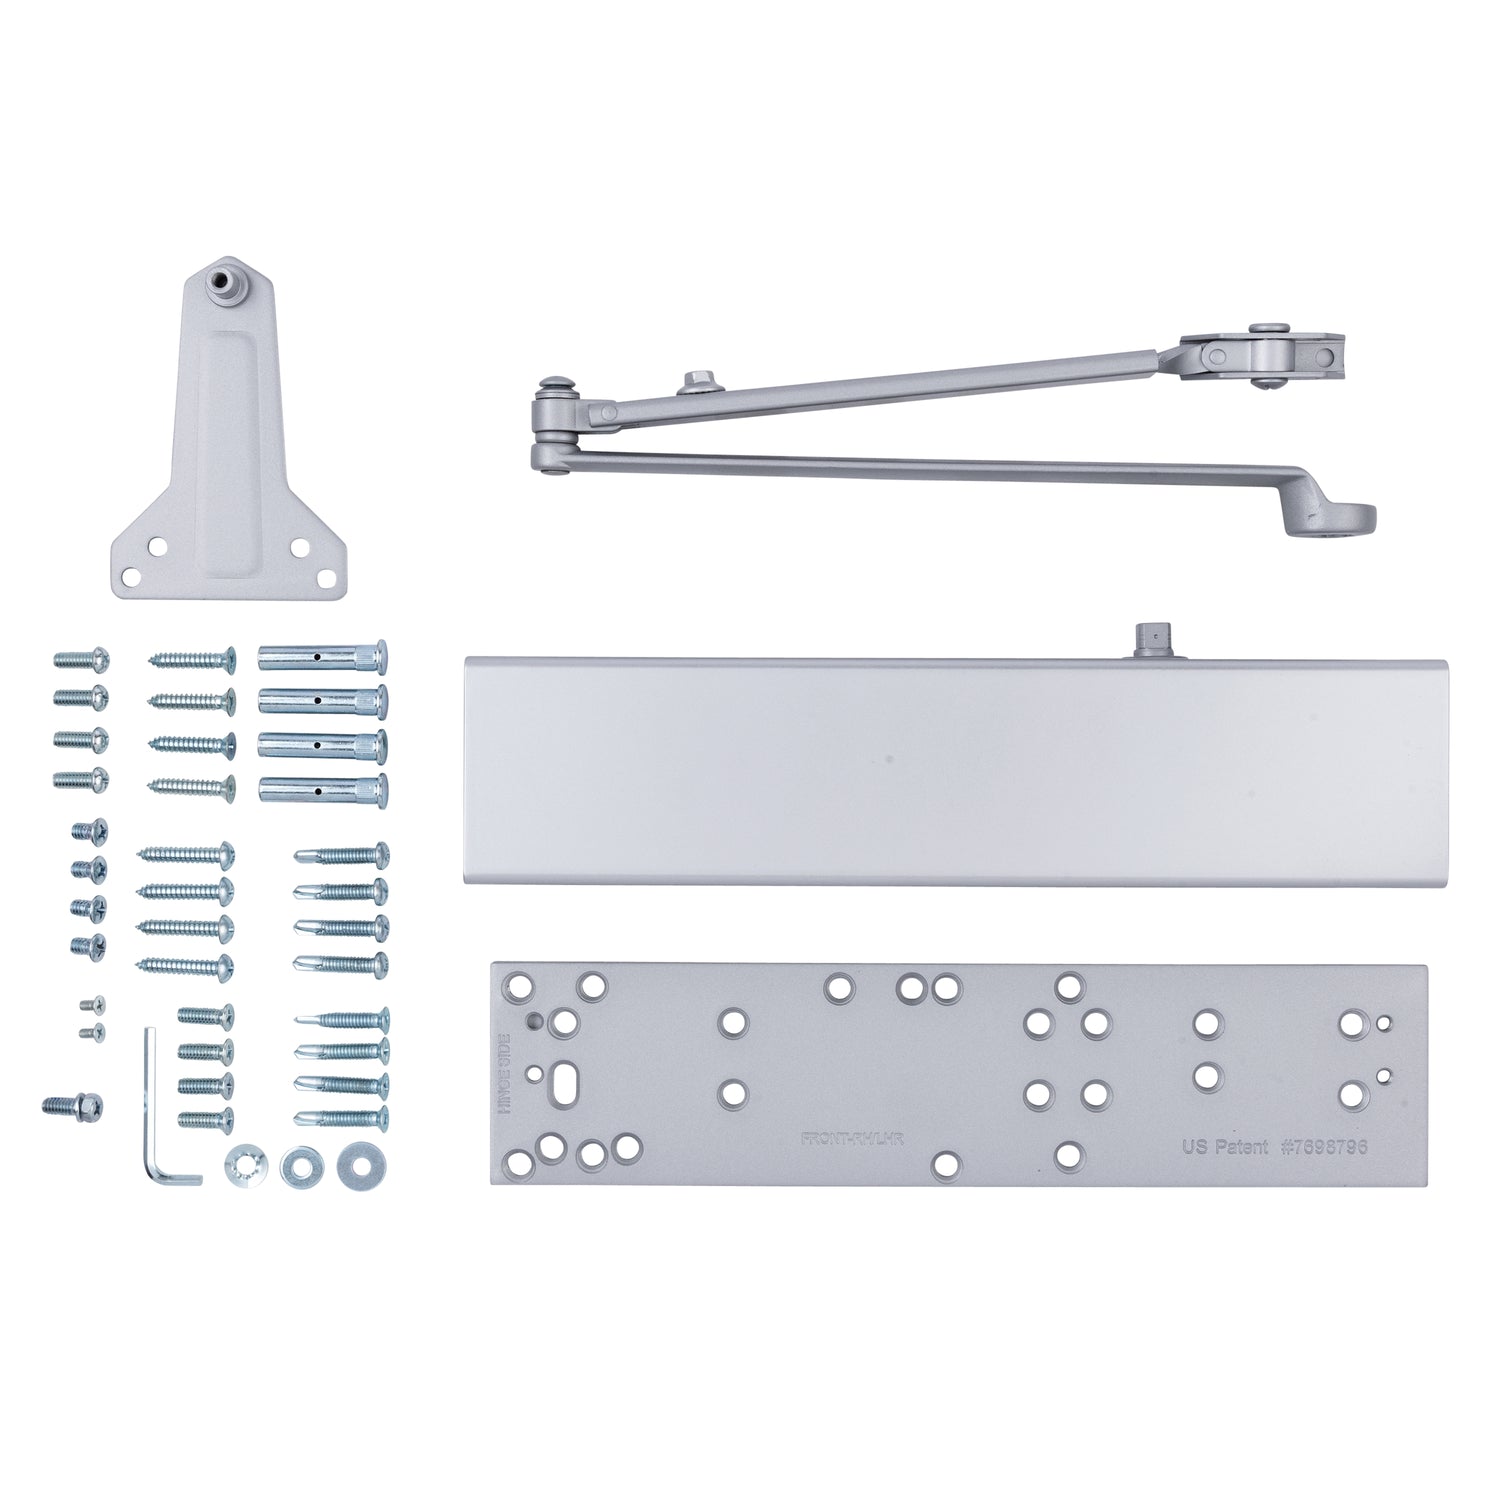 Commercial Door closer and plate with included mounting hardware.